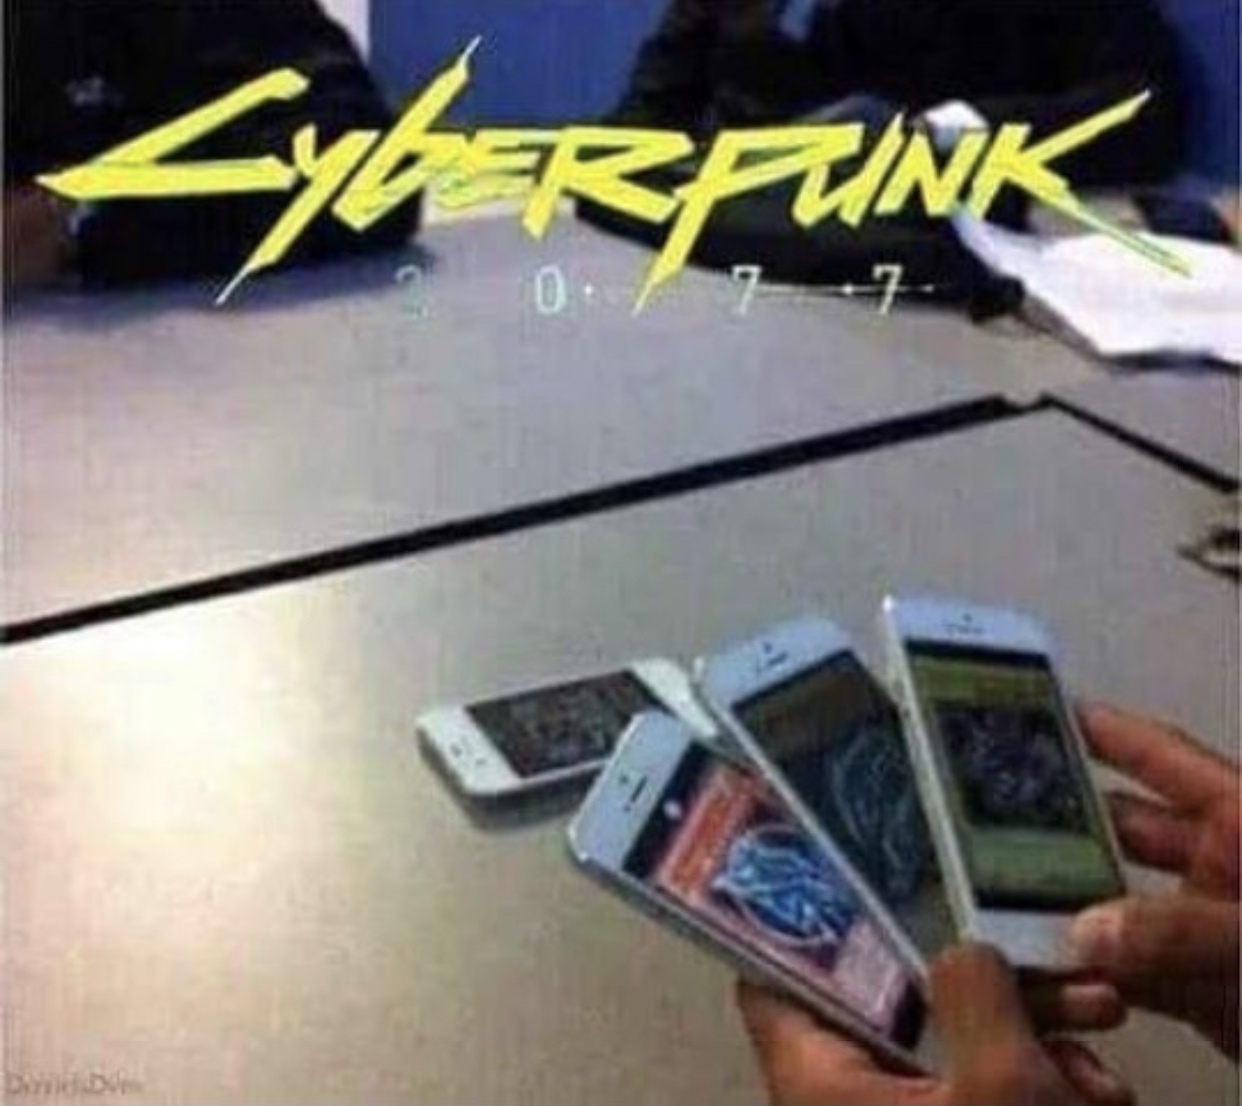 cyberpunk 2077 - playing card game using multiple iphones